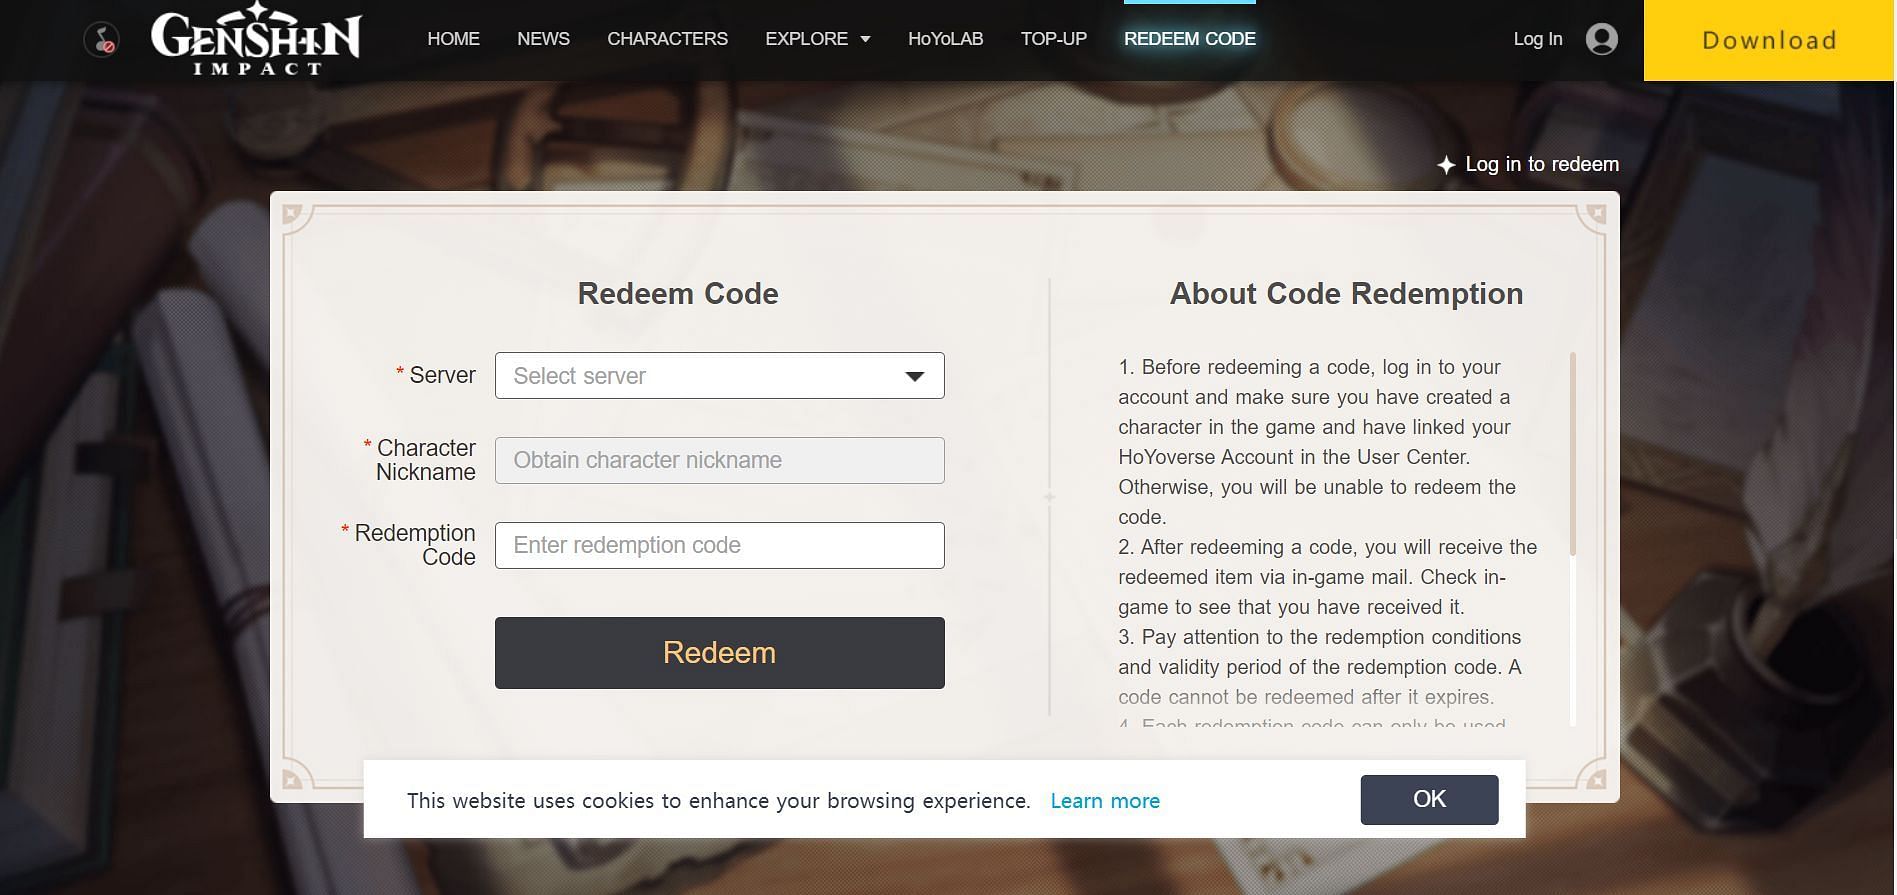 Open the Redeem Code section on the website (Image via HoYoverse)